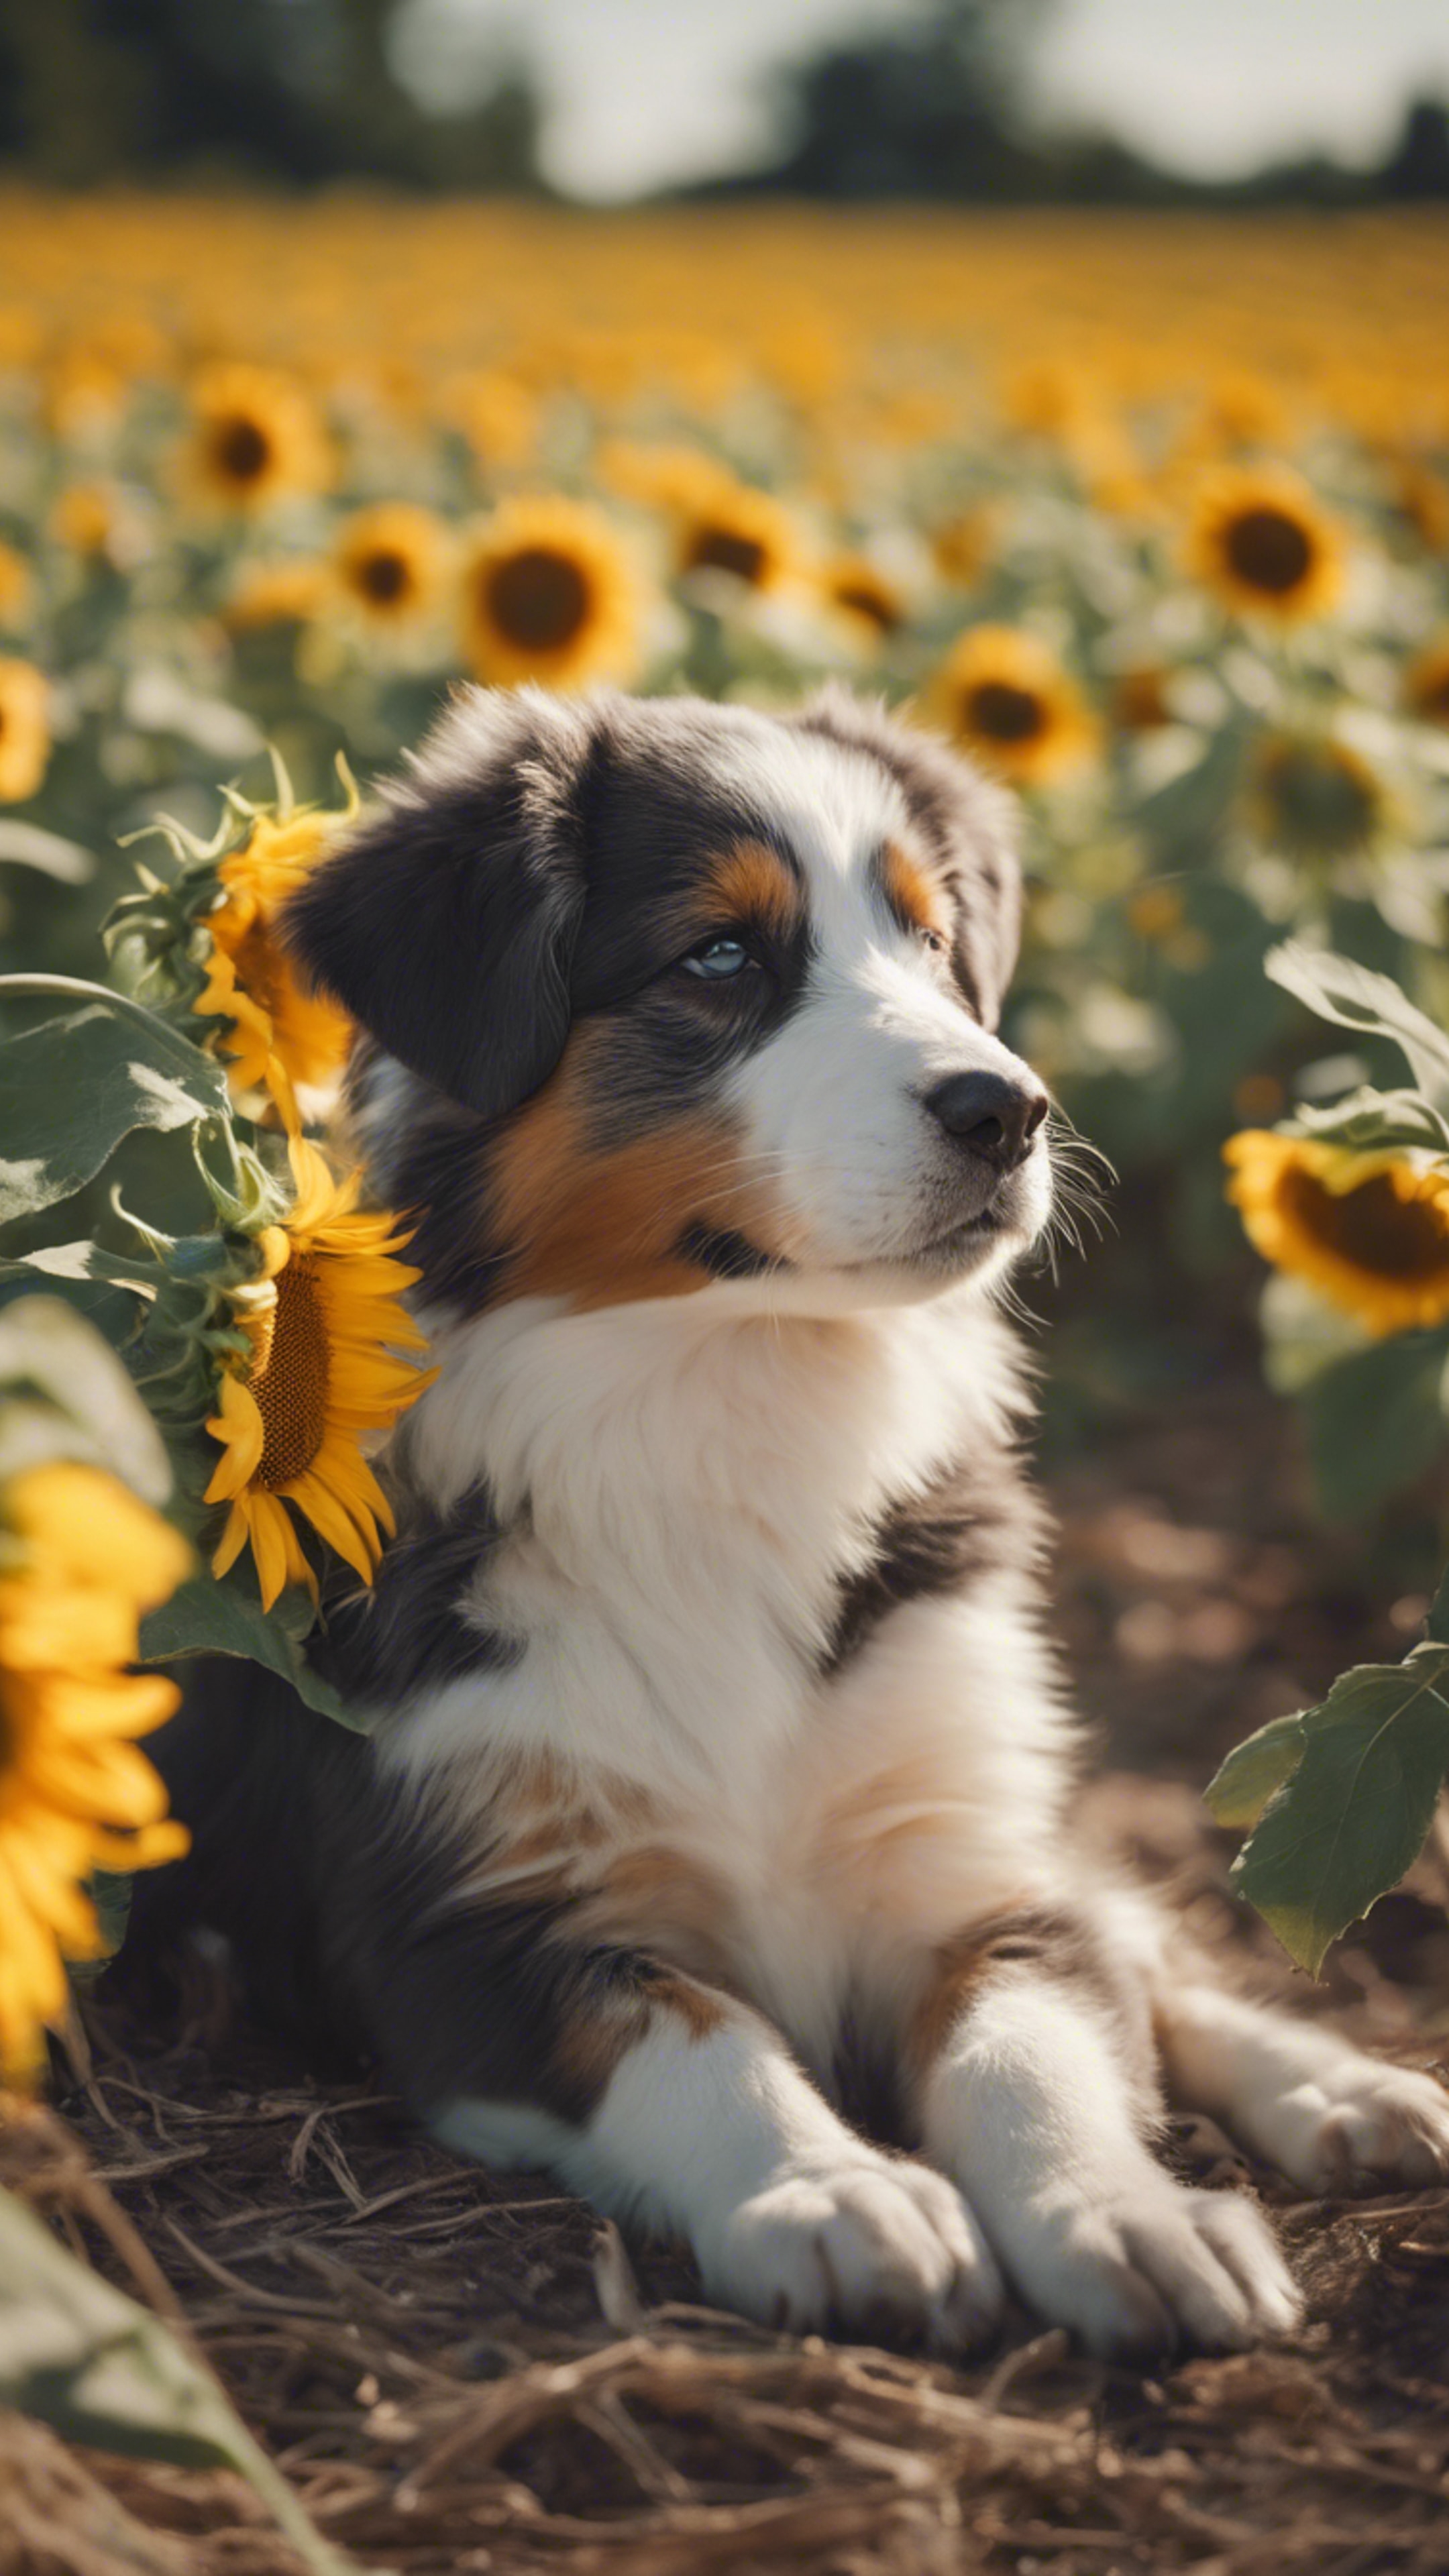 An Australian Shepard puppy dozing off in the field of blooming sunflowers under the summer sun.壁紙[3112e983c8704a9792f4]